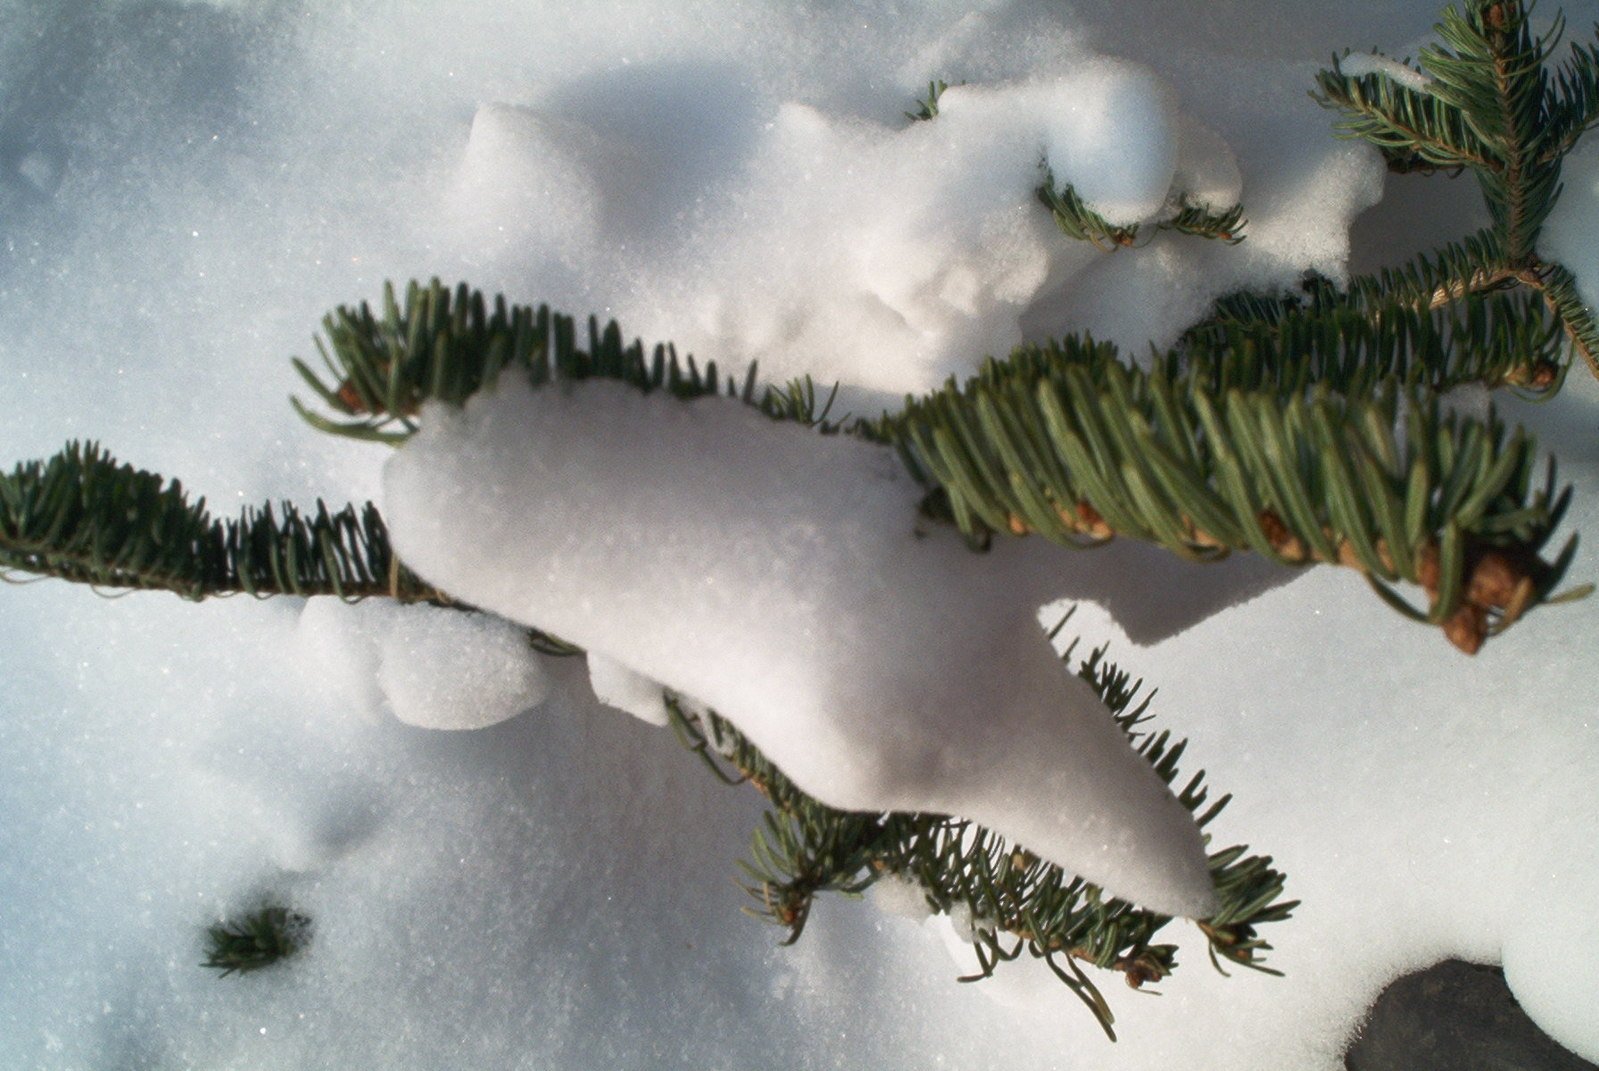 some pine nches covered in snow next to fir